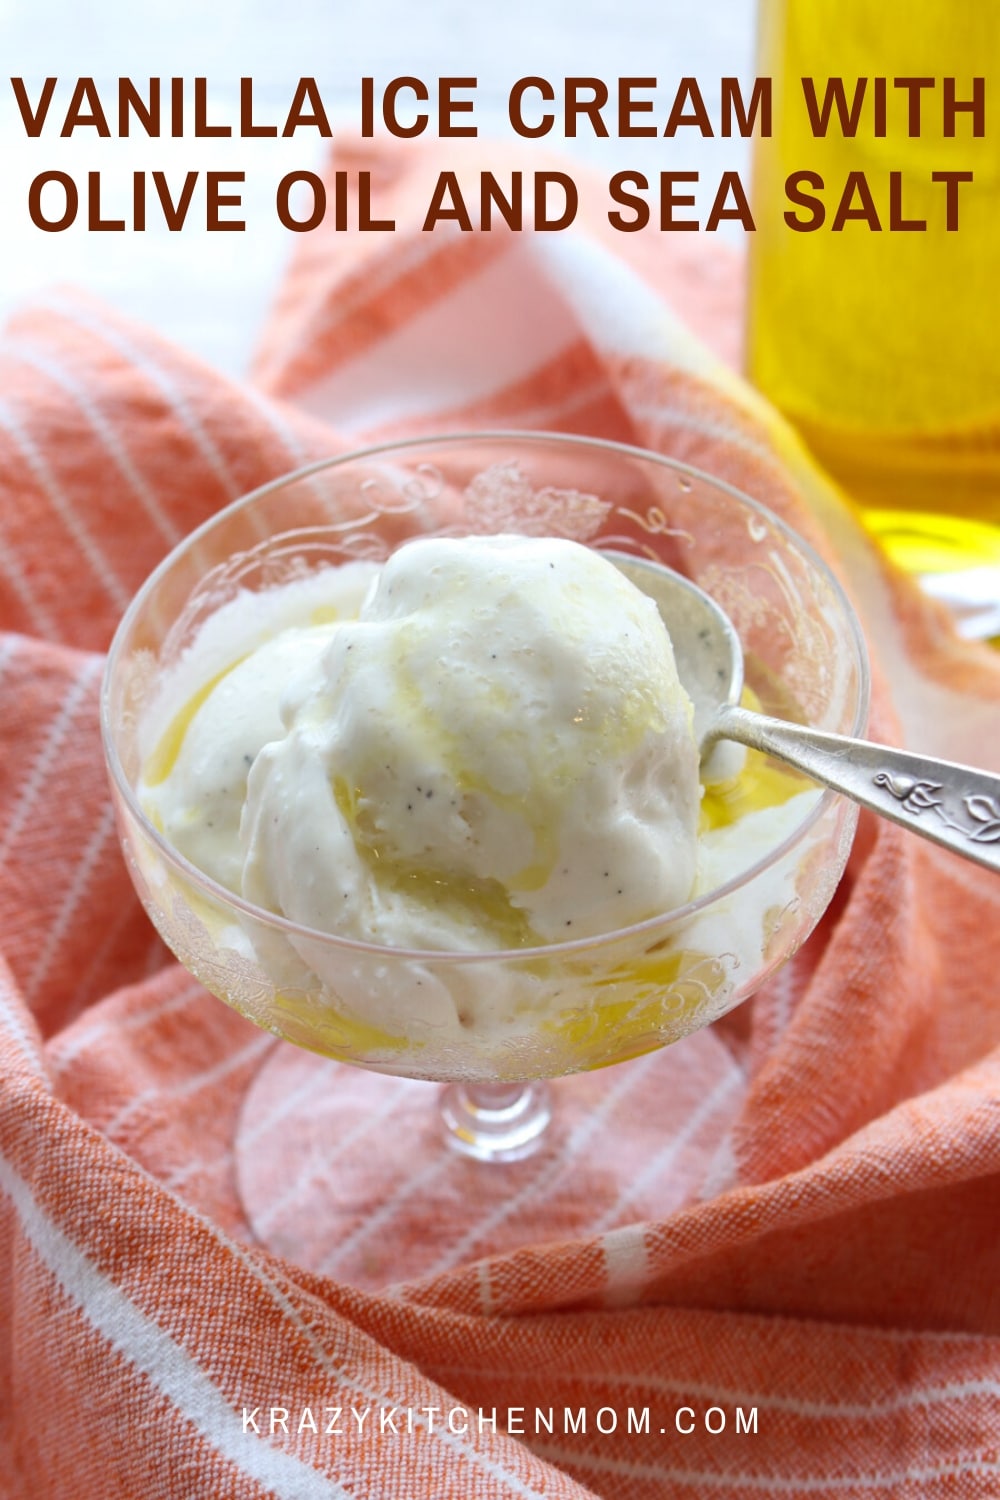 Premium vanilla ice cream drizzled with good olive oil and sprinkled with coarse sea salt is a simply amazing and addicting flavor combination. via @krazykitchenmom